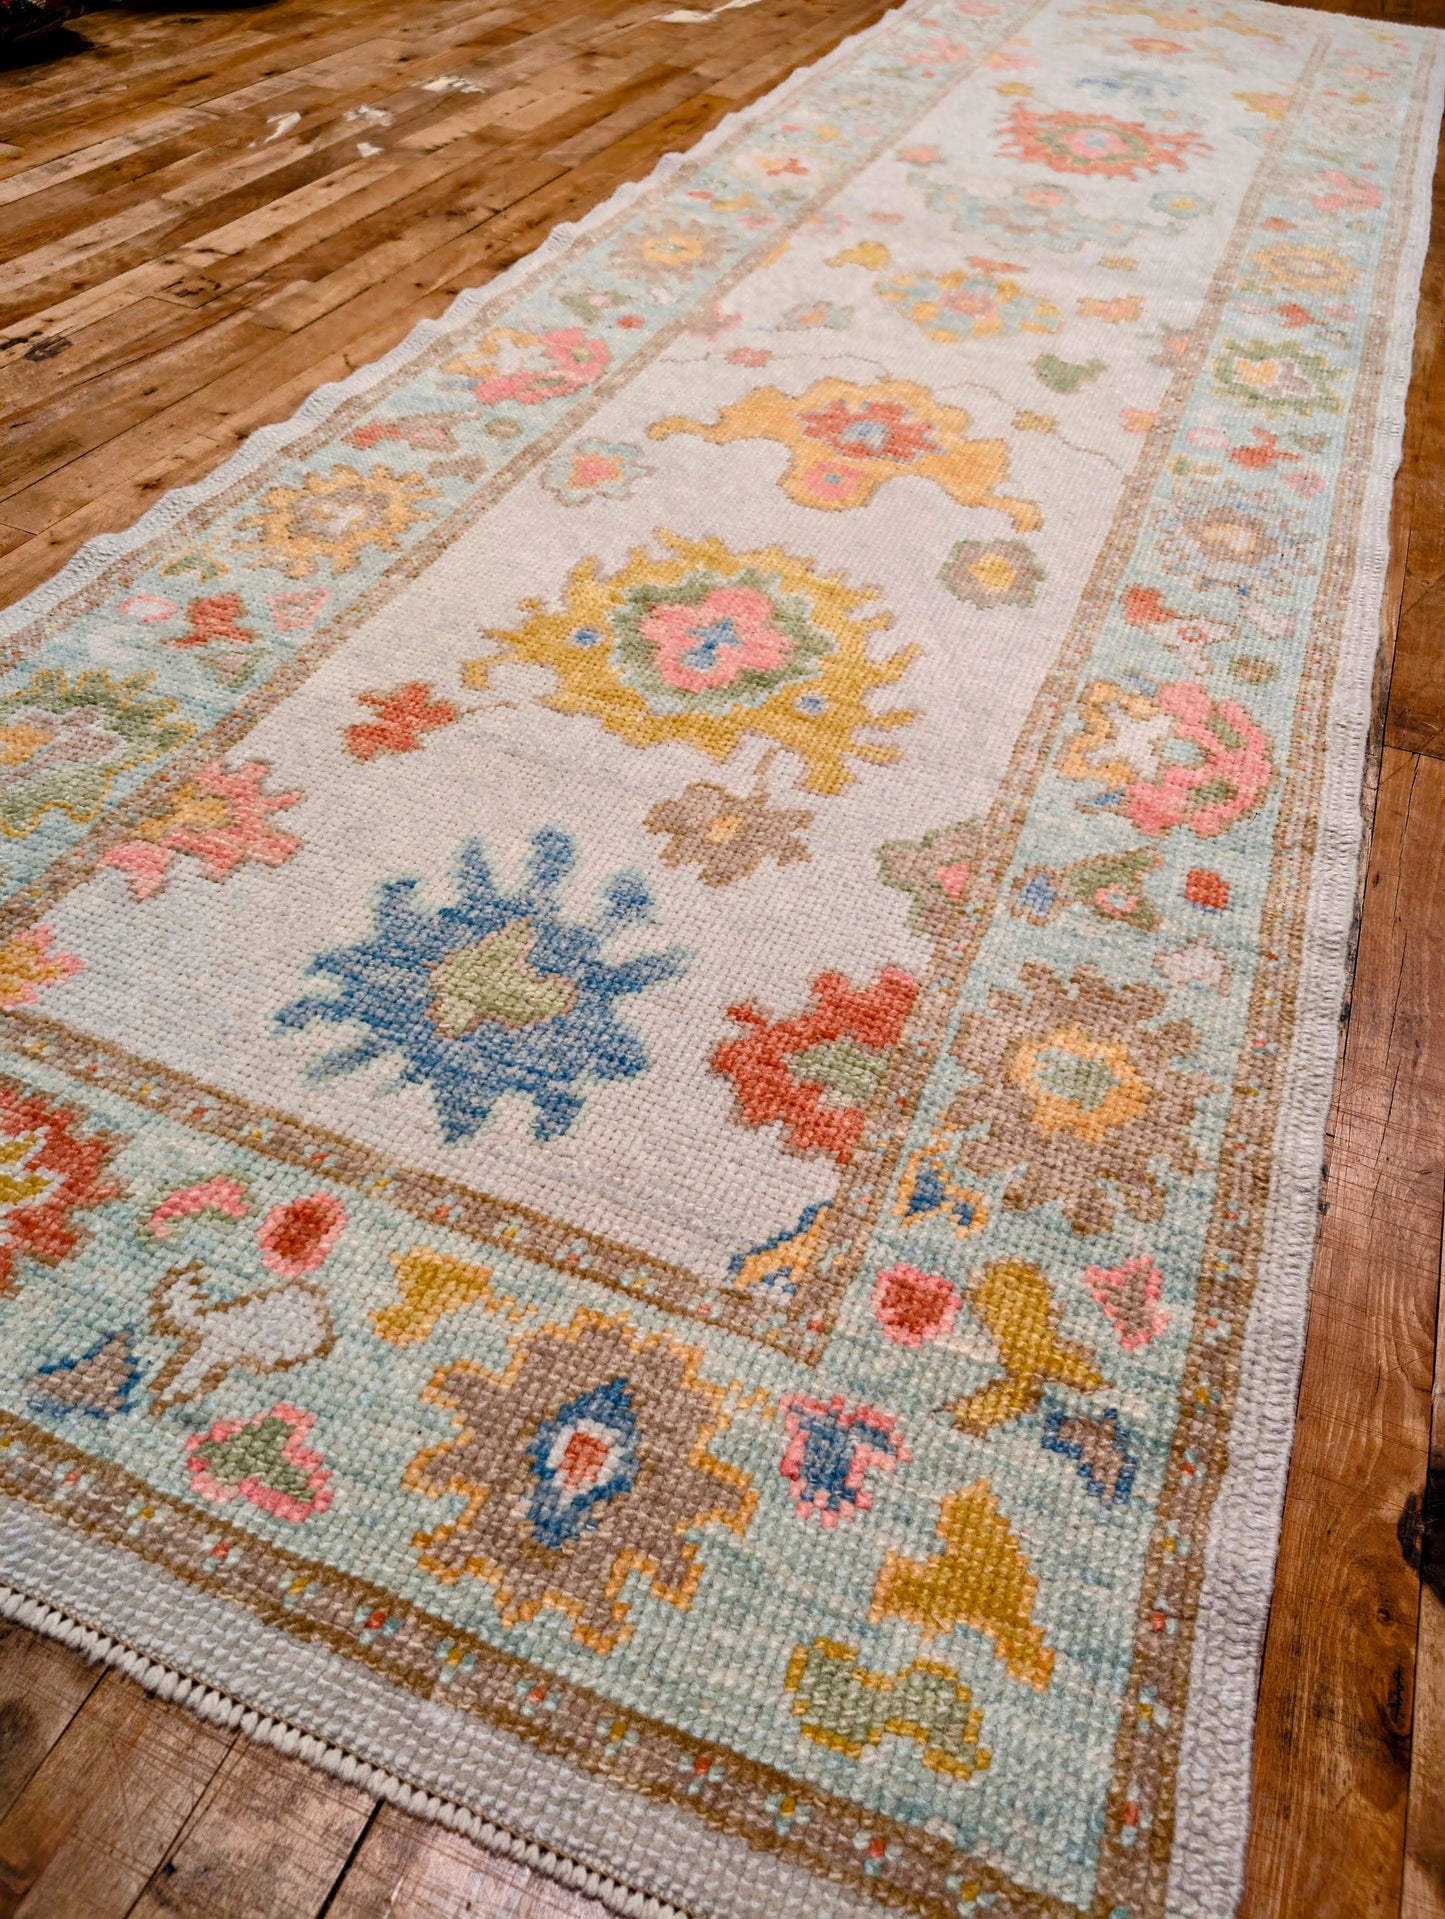 Turkish Oushak hand-knotted Runner Rug 3x10